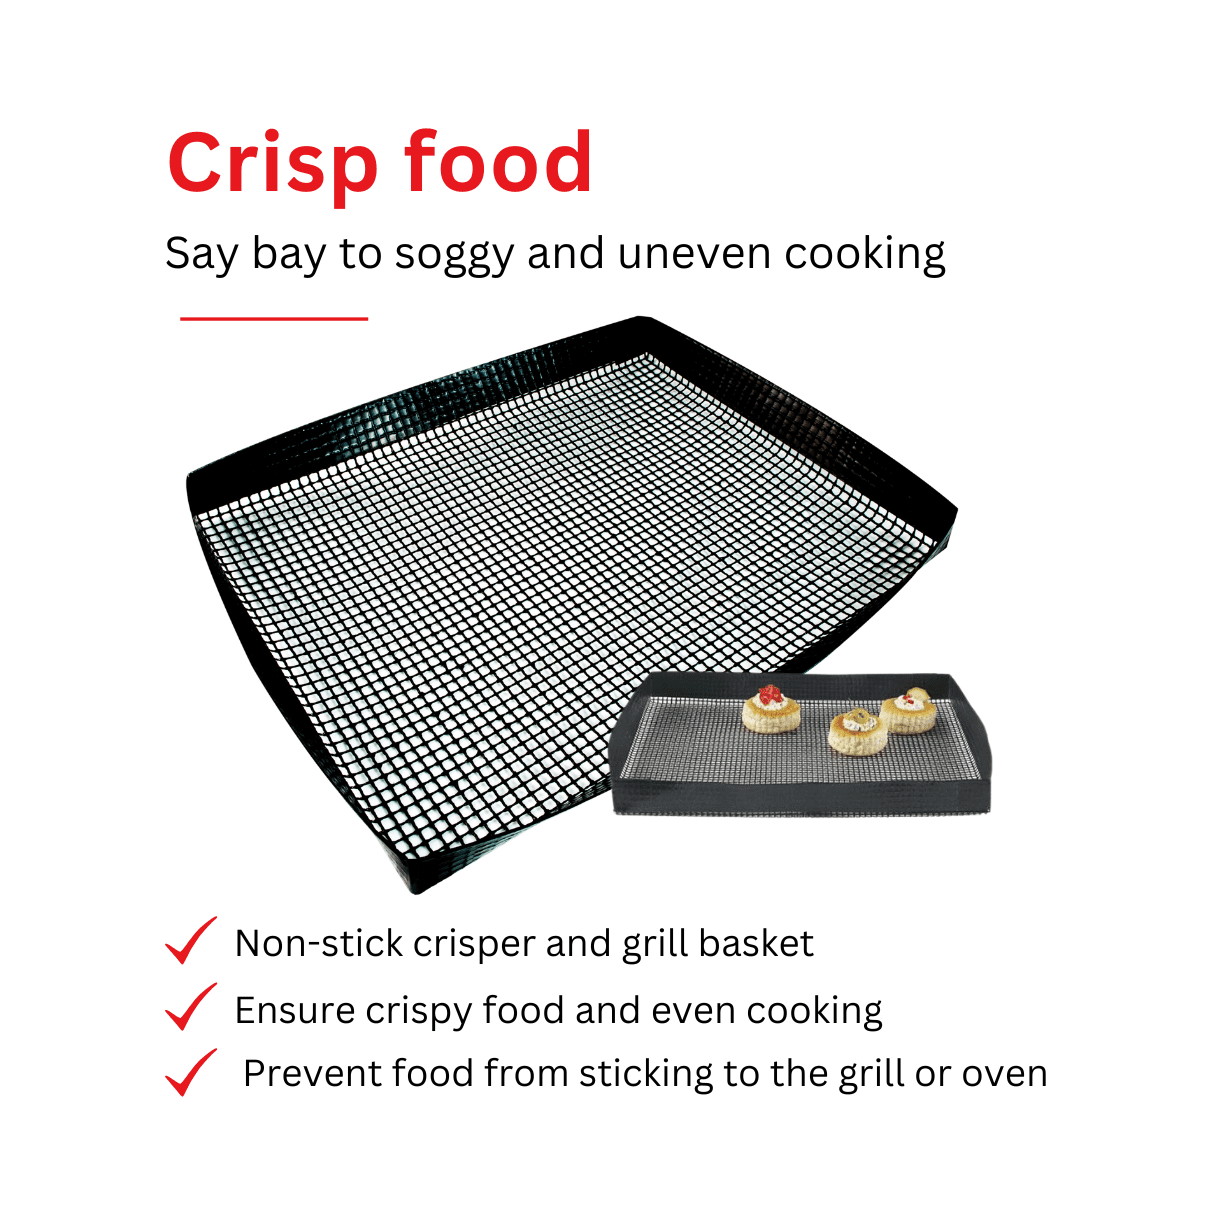  Air Fryer Basket for Oven - Non-Stick Oven Air Fryer Basket -  Crisping Sheet for Baking Crisp Pizza, Chips, Fries, & More With Less Oil,  Butter or Cooking Spray - Dishwasher